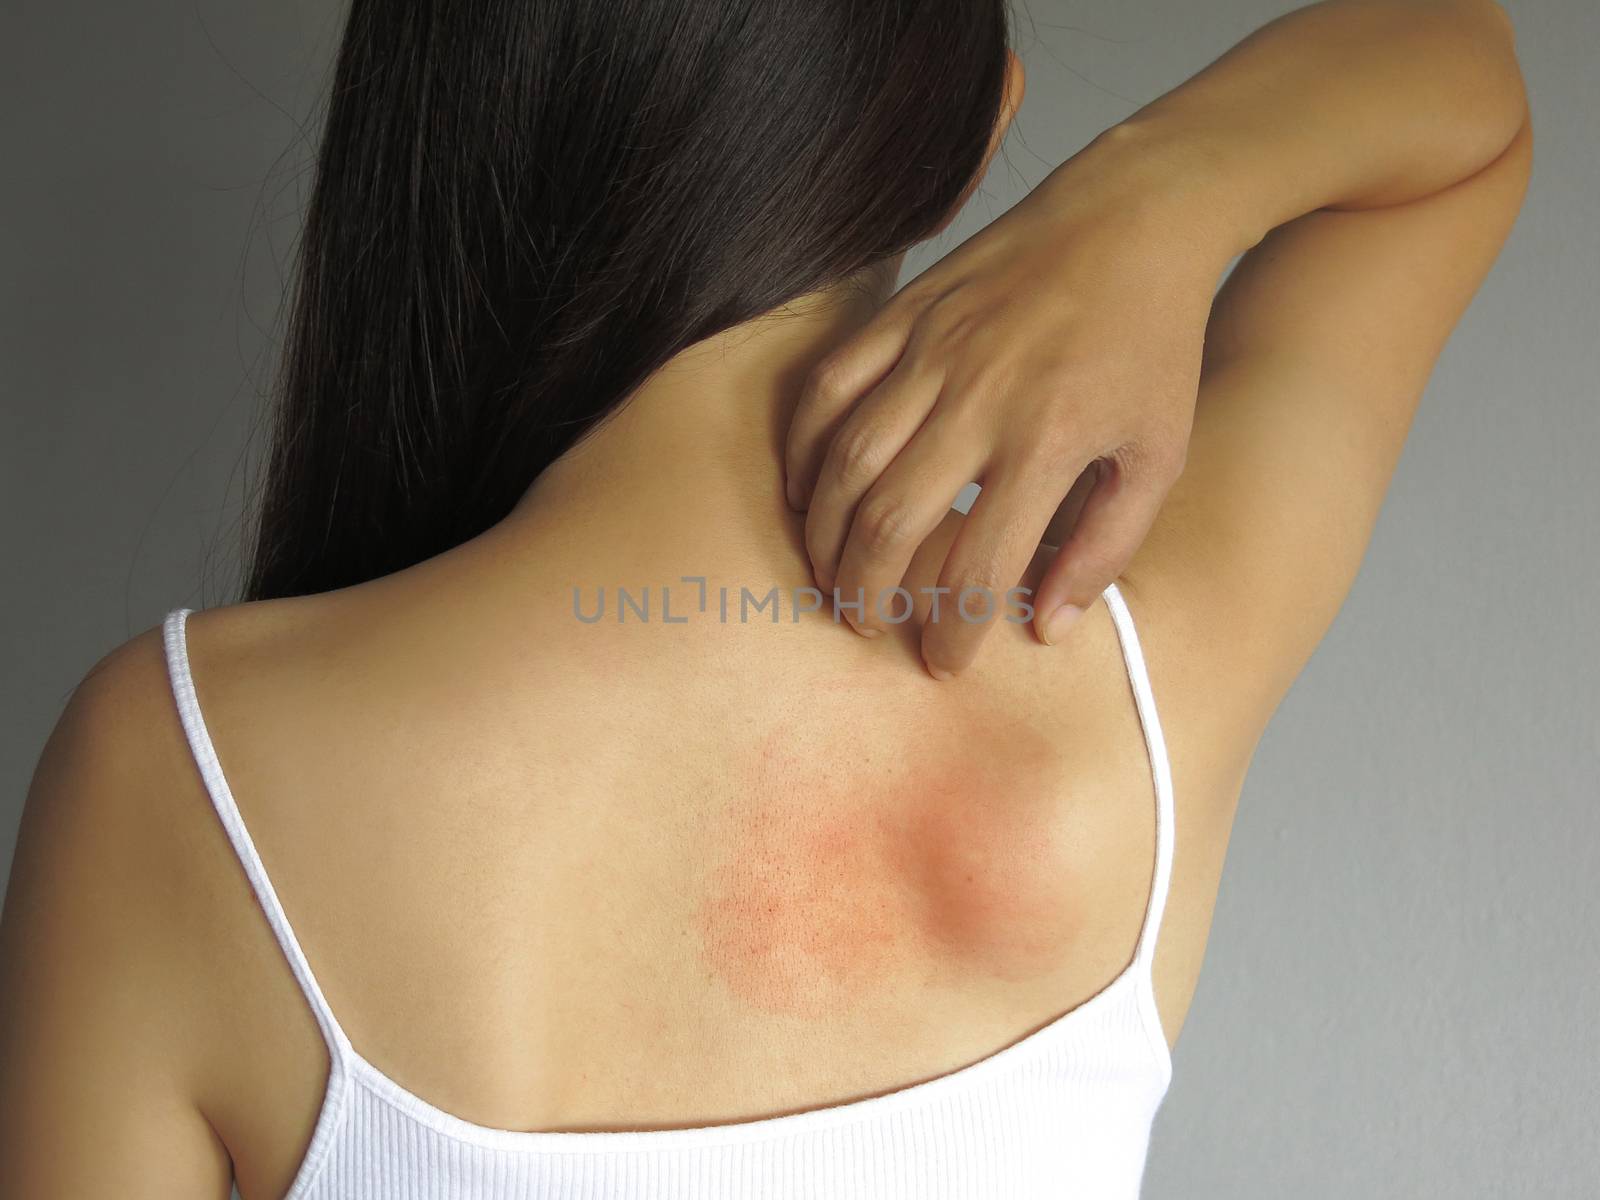 Health allergy skin care problem. Closeup young woman scratching her itchy back with allergy rash by asiandelight